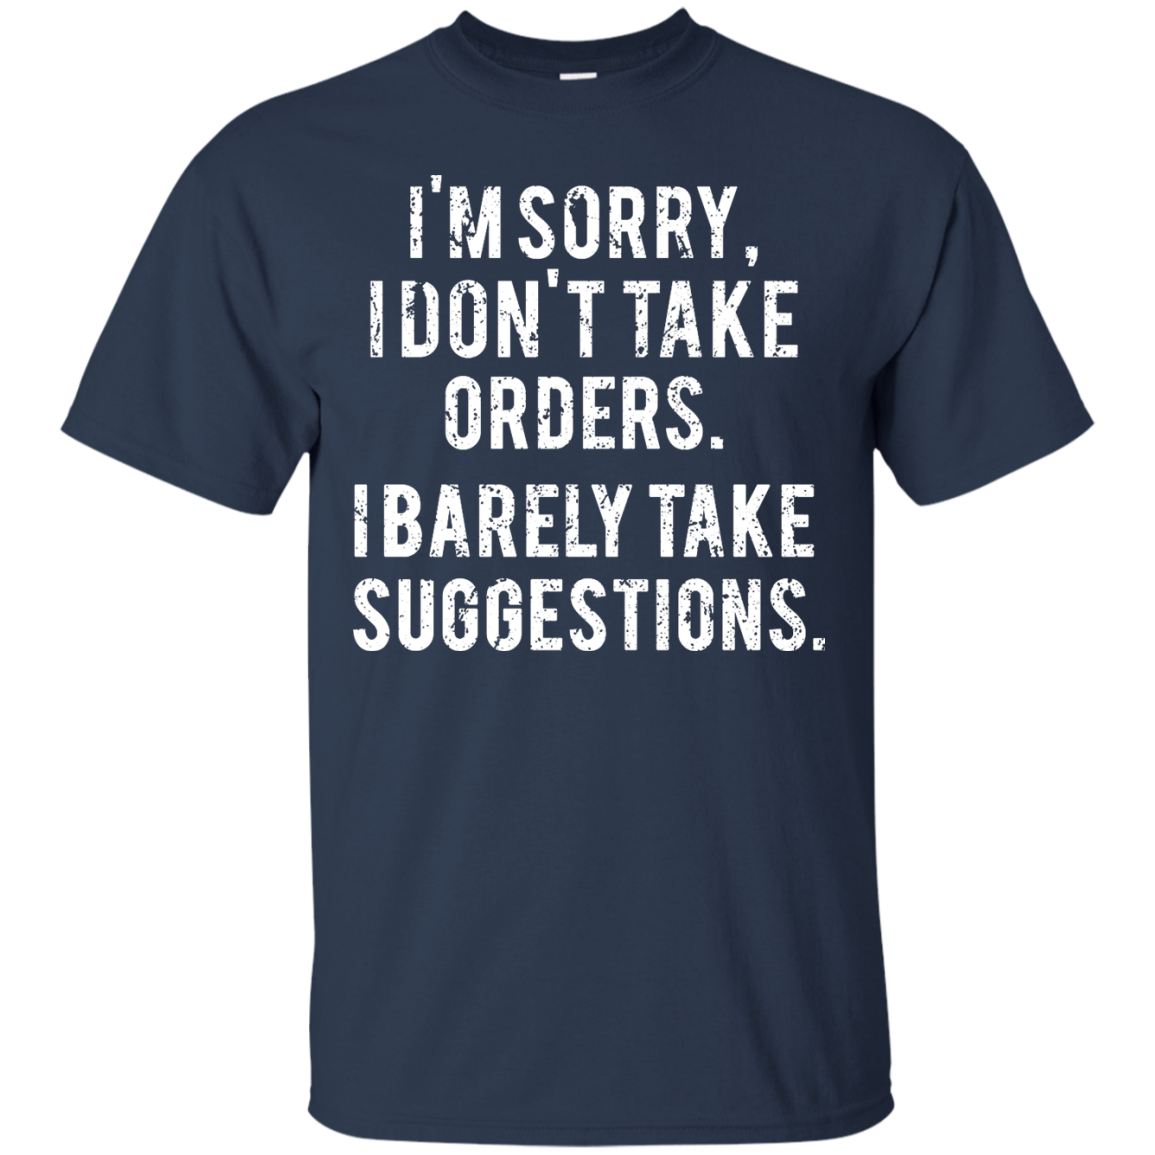 Funny Shirts - I am sorry I don't take orders I barely take suggestions ...